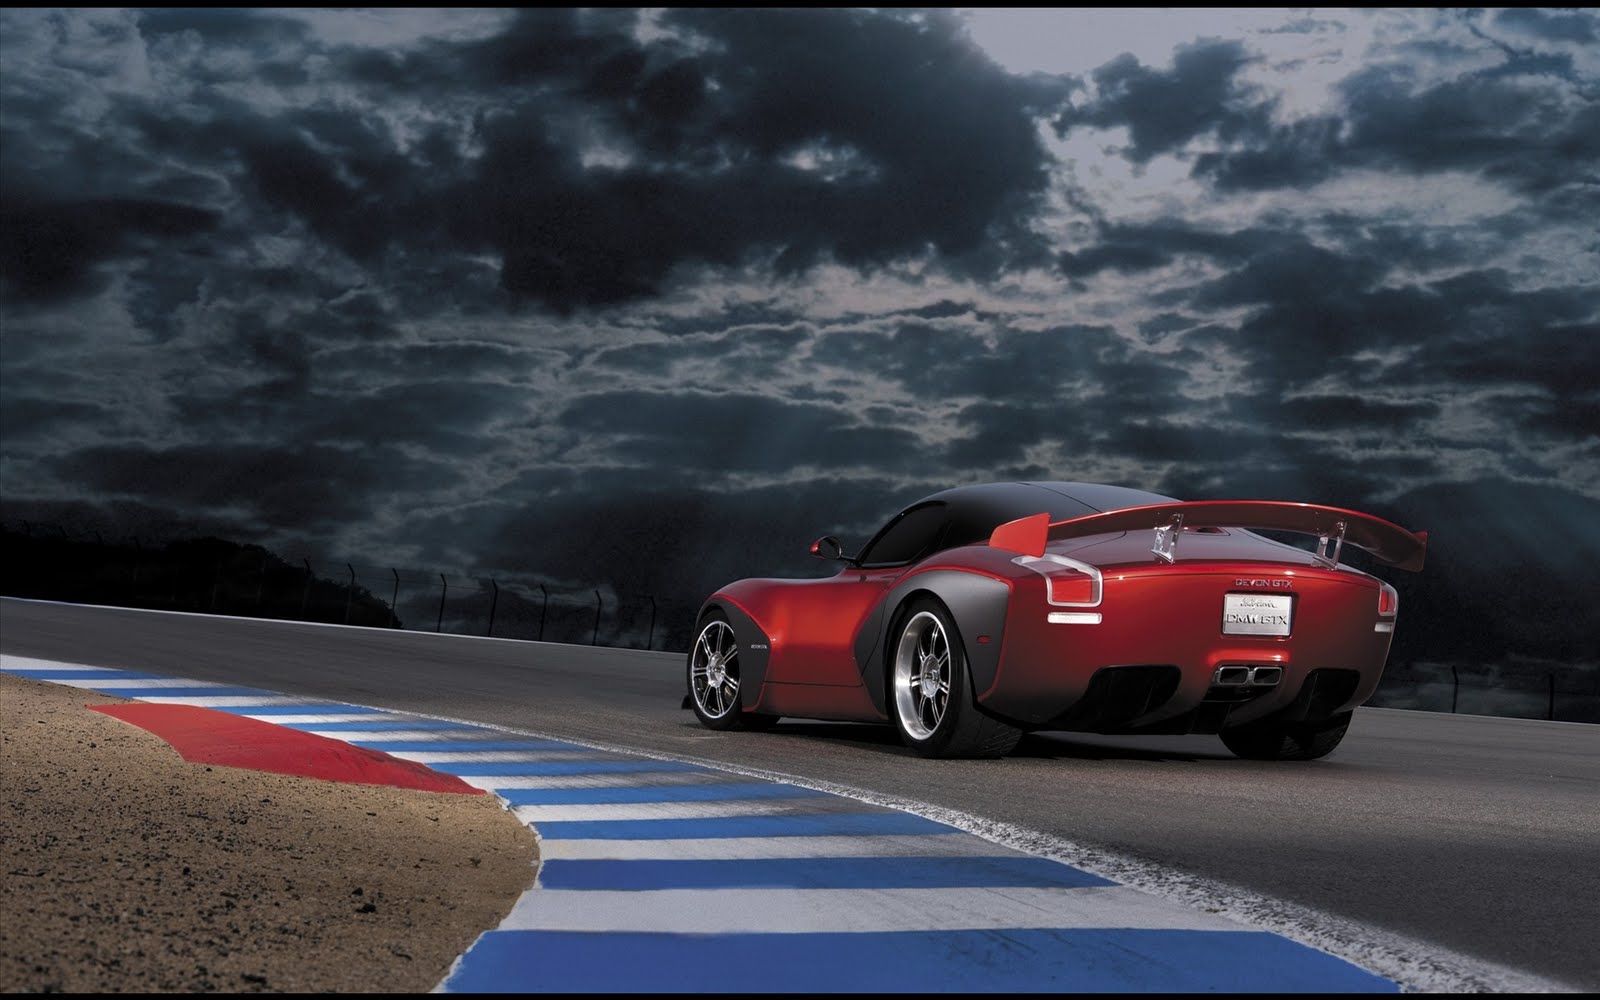 Hd Real World Wallpapers: 30 New Cars HD Wallpapers 2011